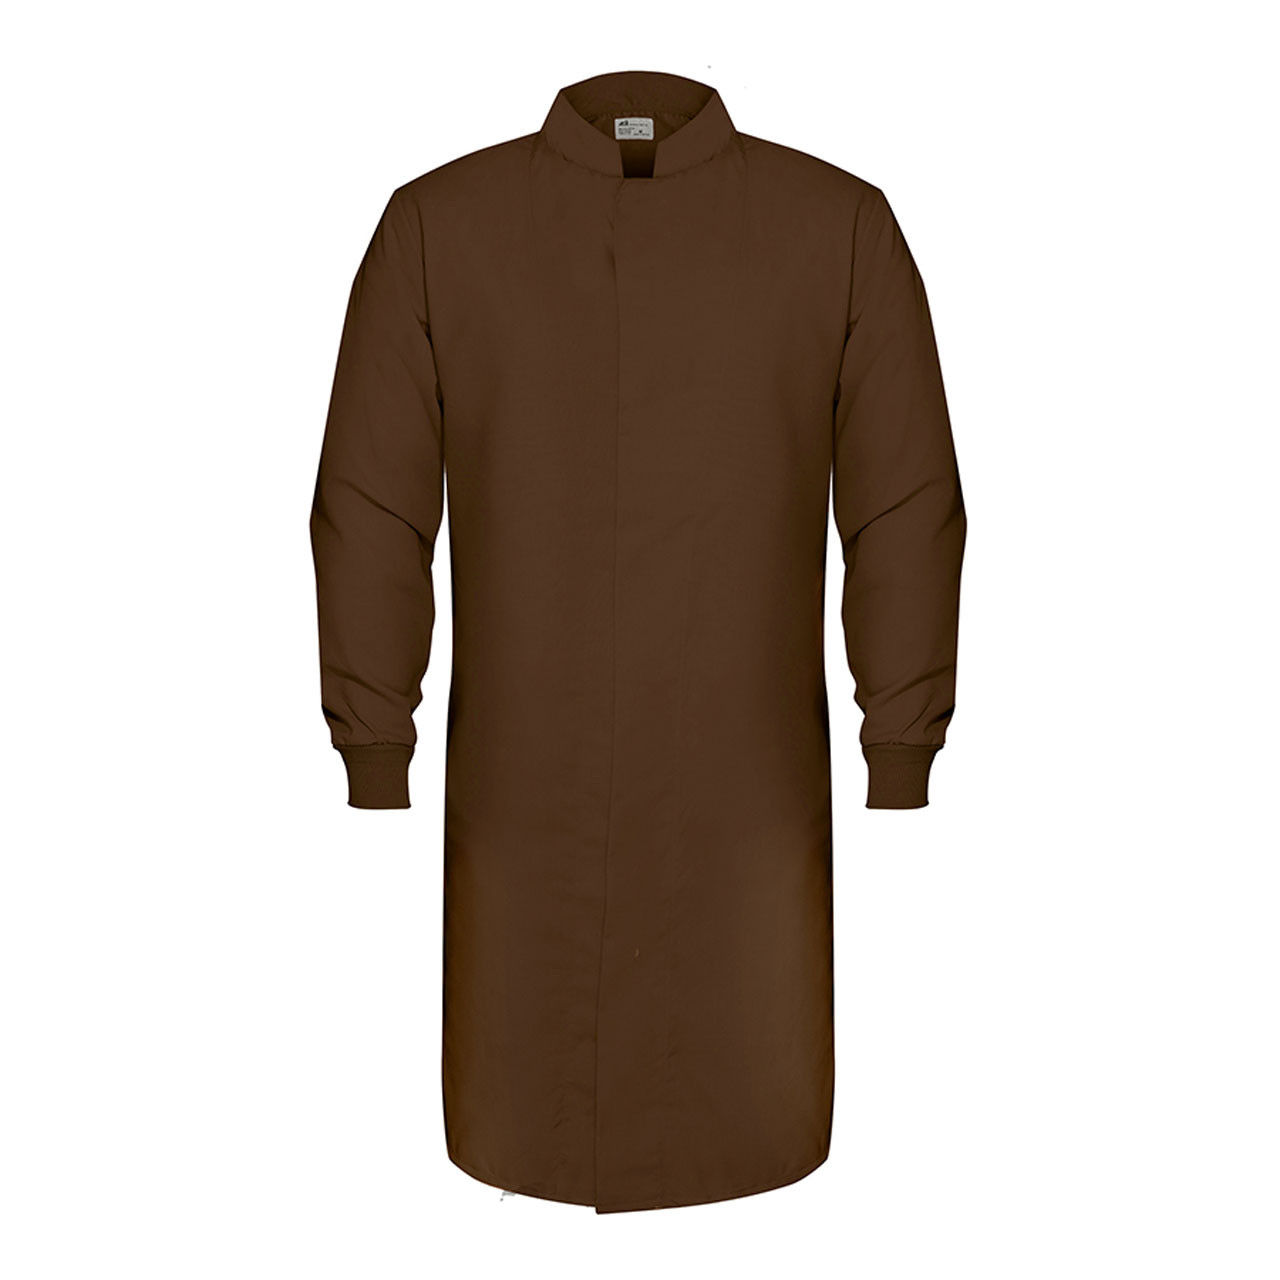 Is the HACCP Knit Cuff Lab Coat in a brown lab coat color?